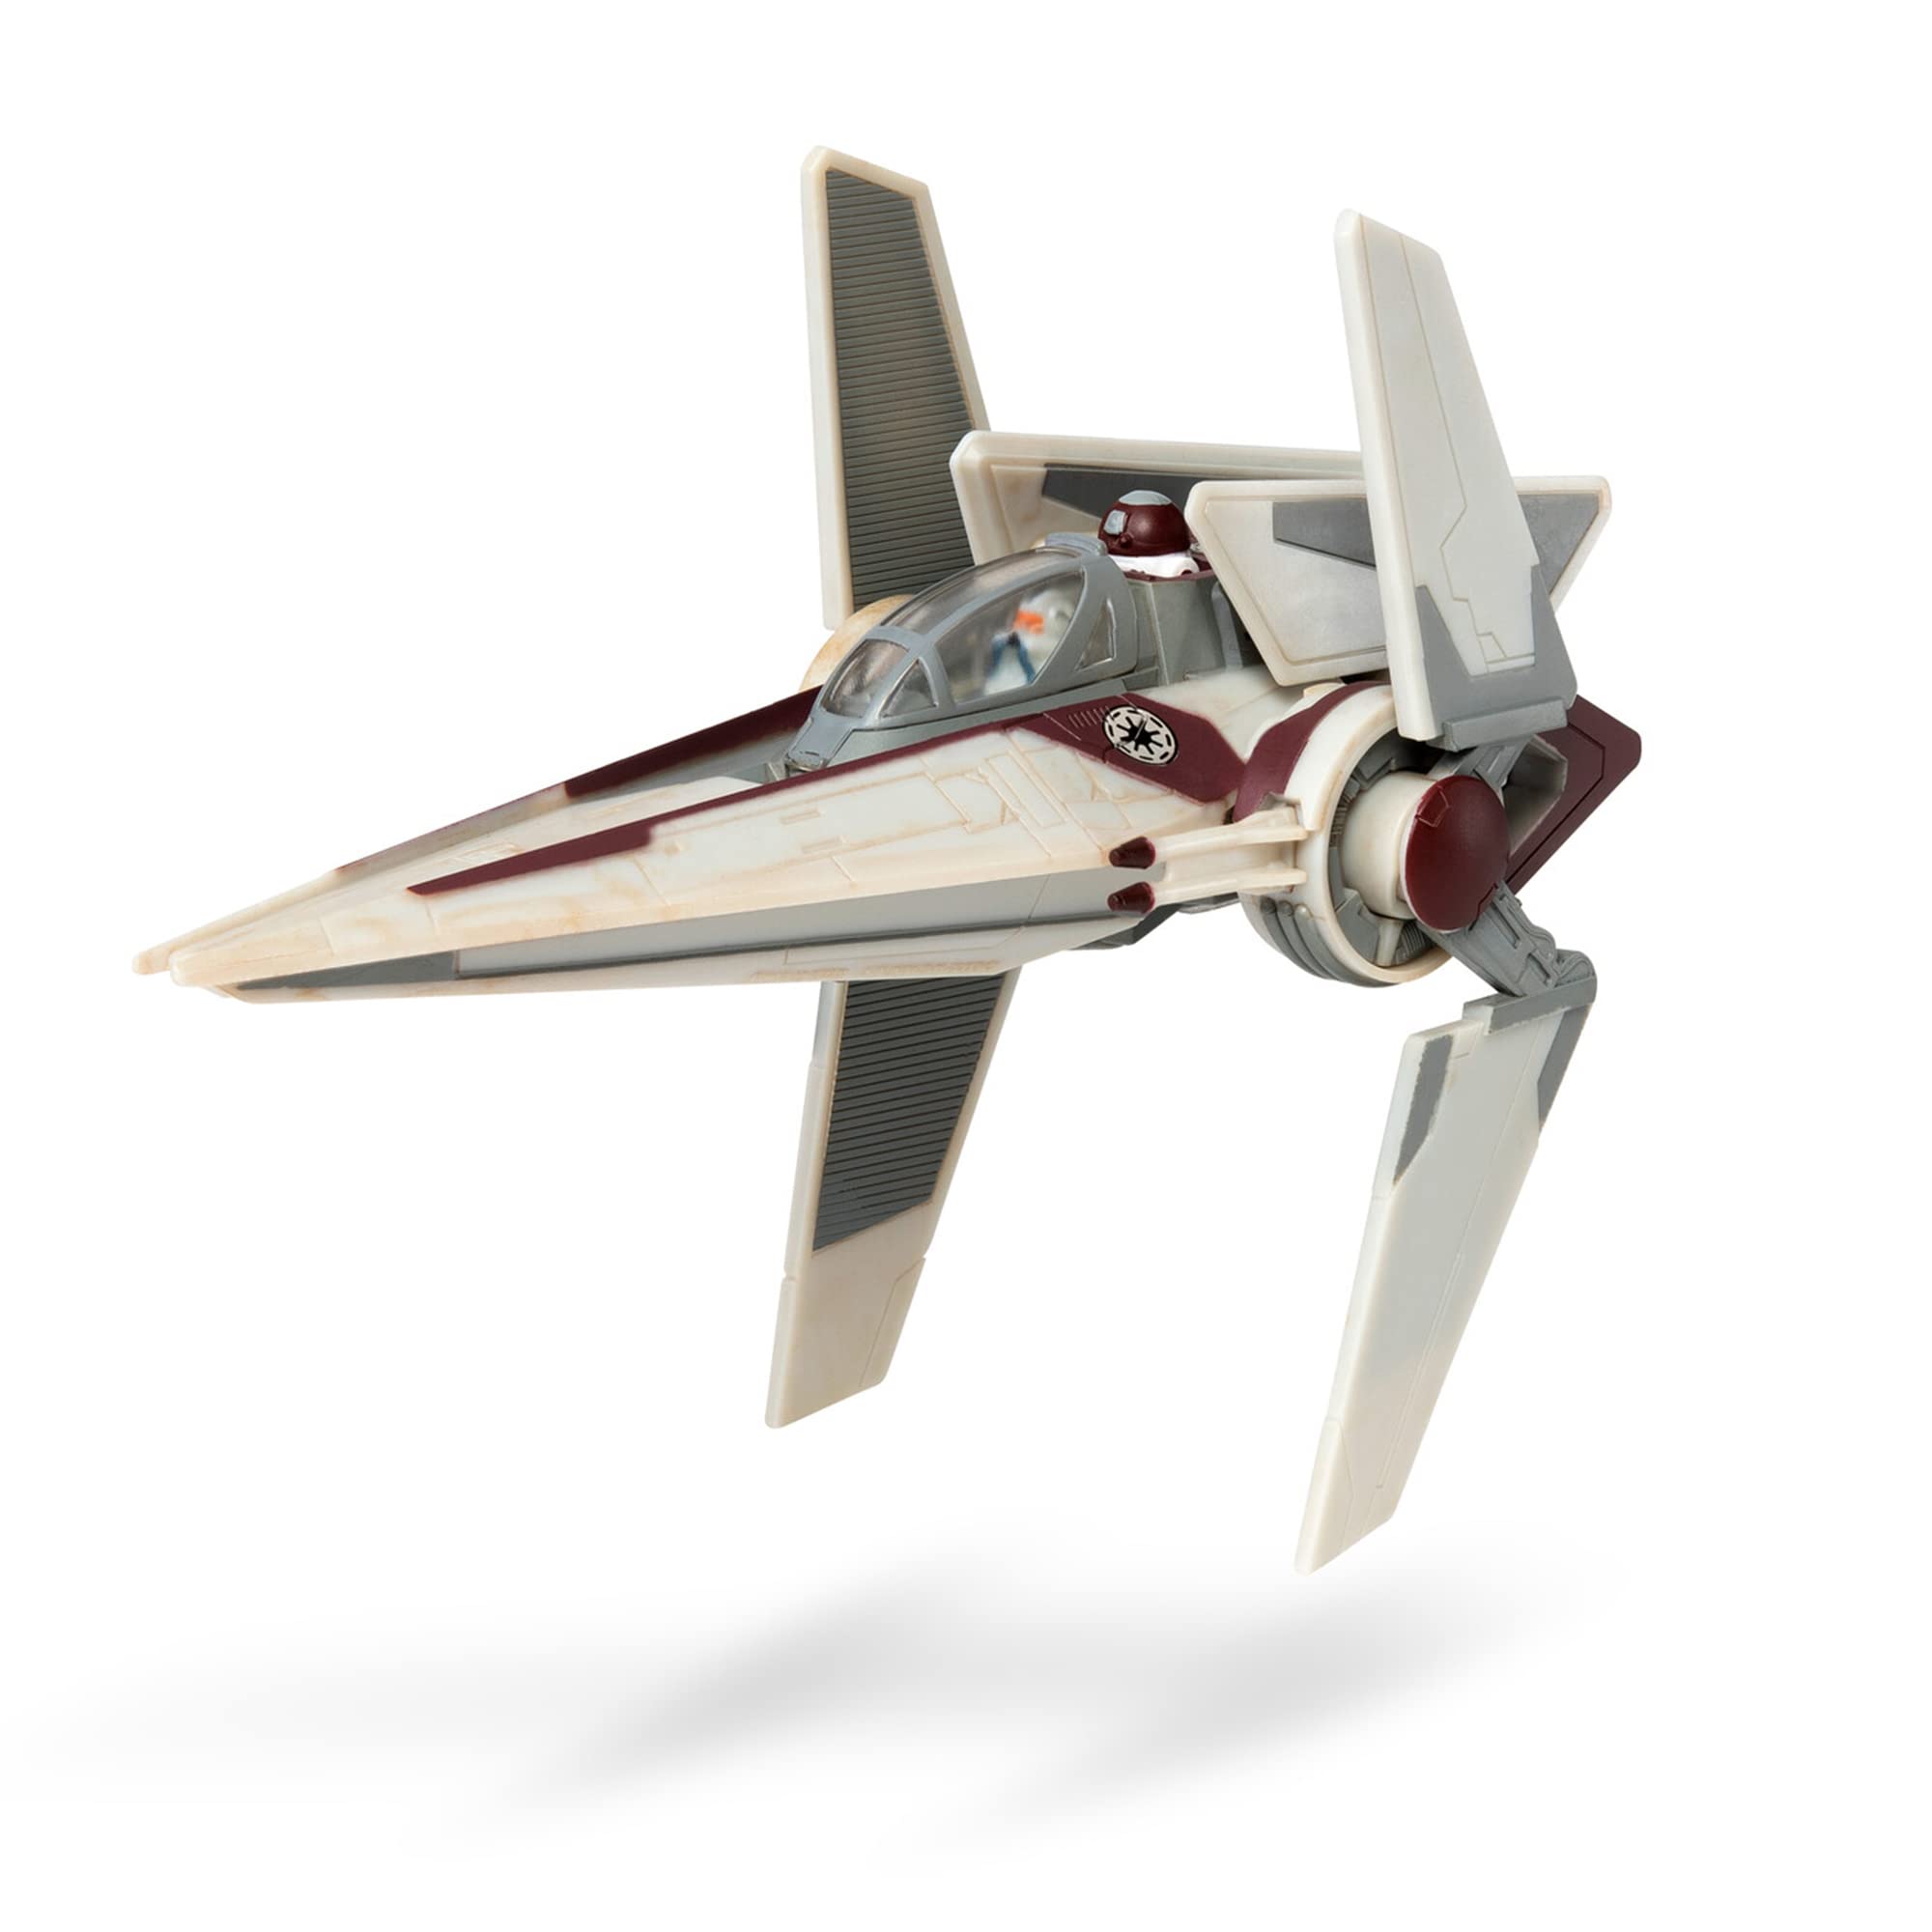 STAR WARS Micro Galaxy Squadron V-Wing Starfighter - 3-Inch Light Armor Class Vehicle with Two 1-Inch Micro Figure Accessories